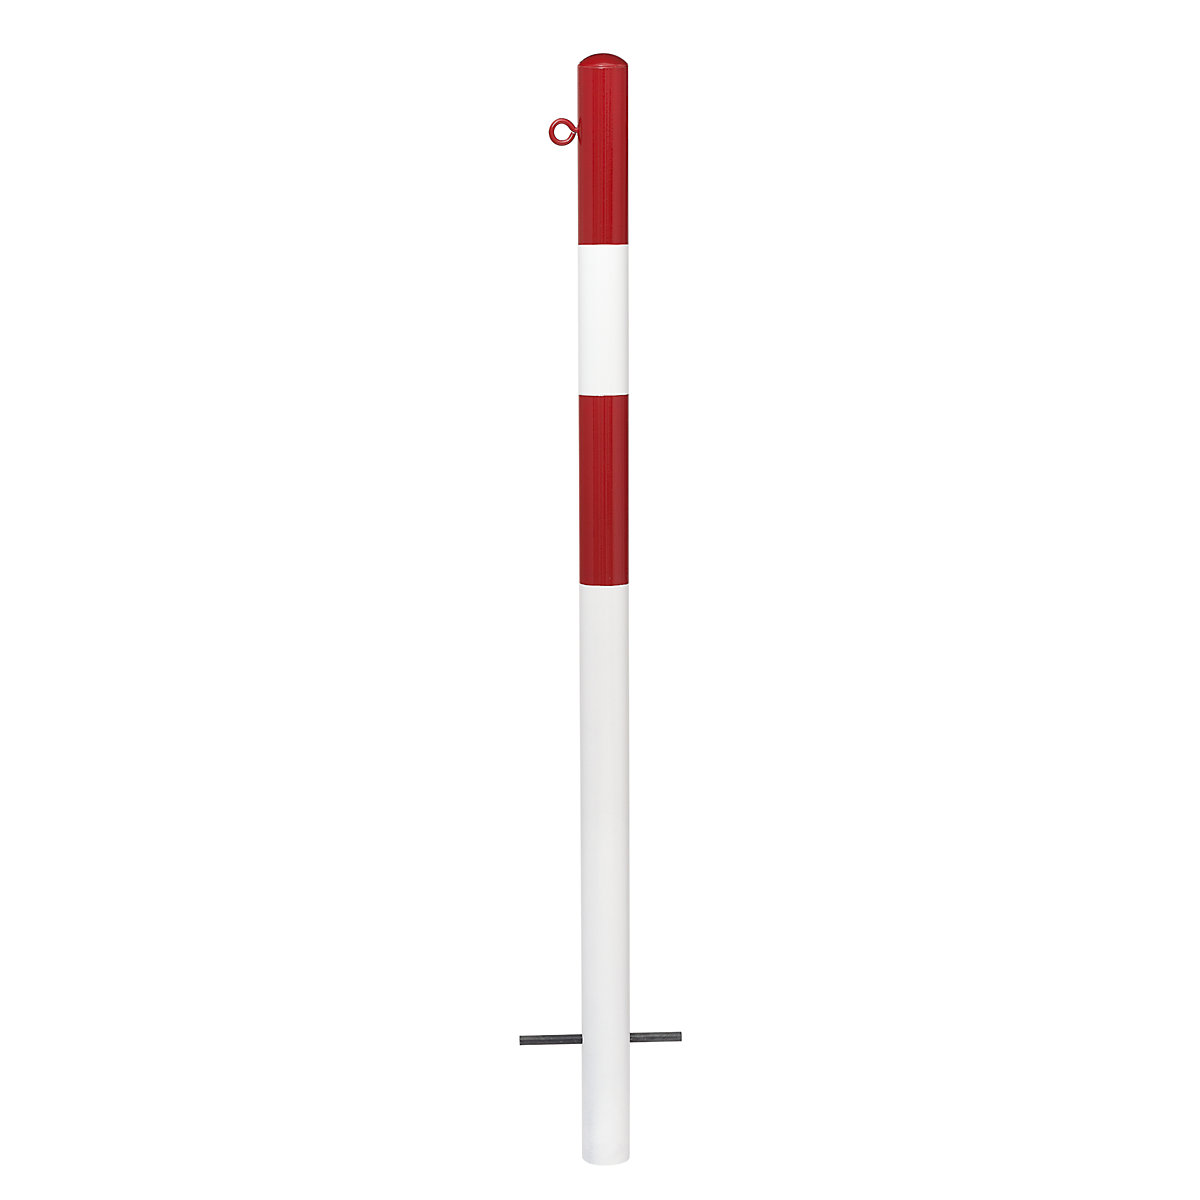 Barrier post, for setting in concrete, Ø 60 mm, painted red/white, 1 eyelet-5